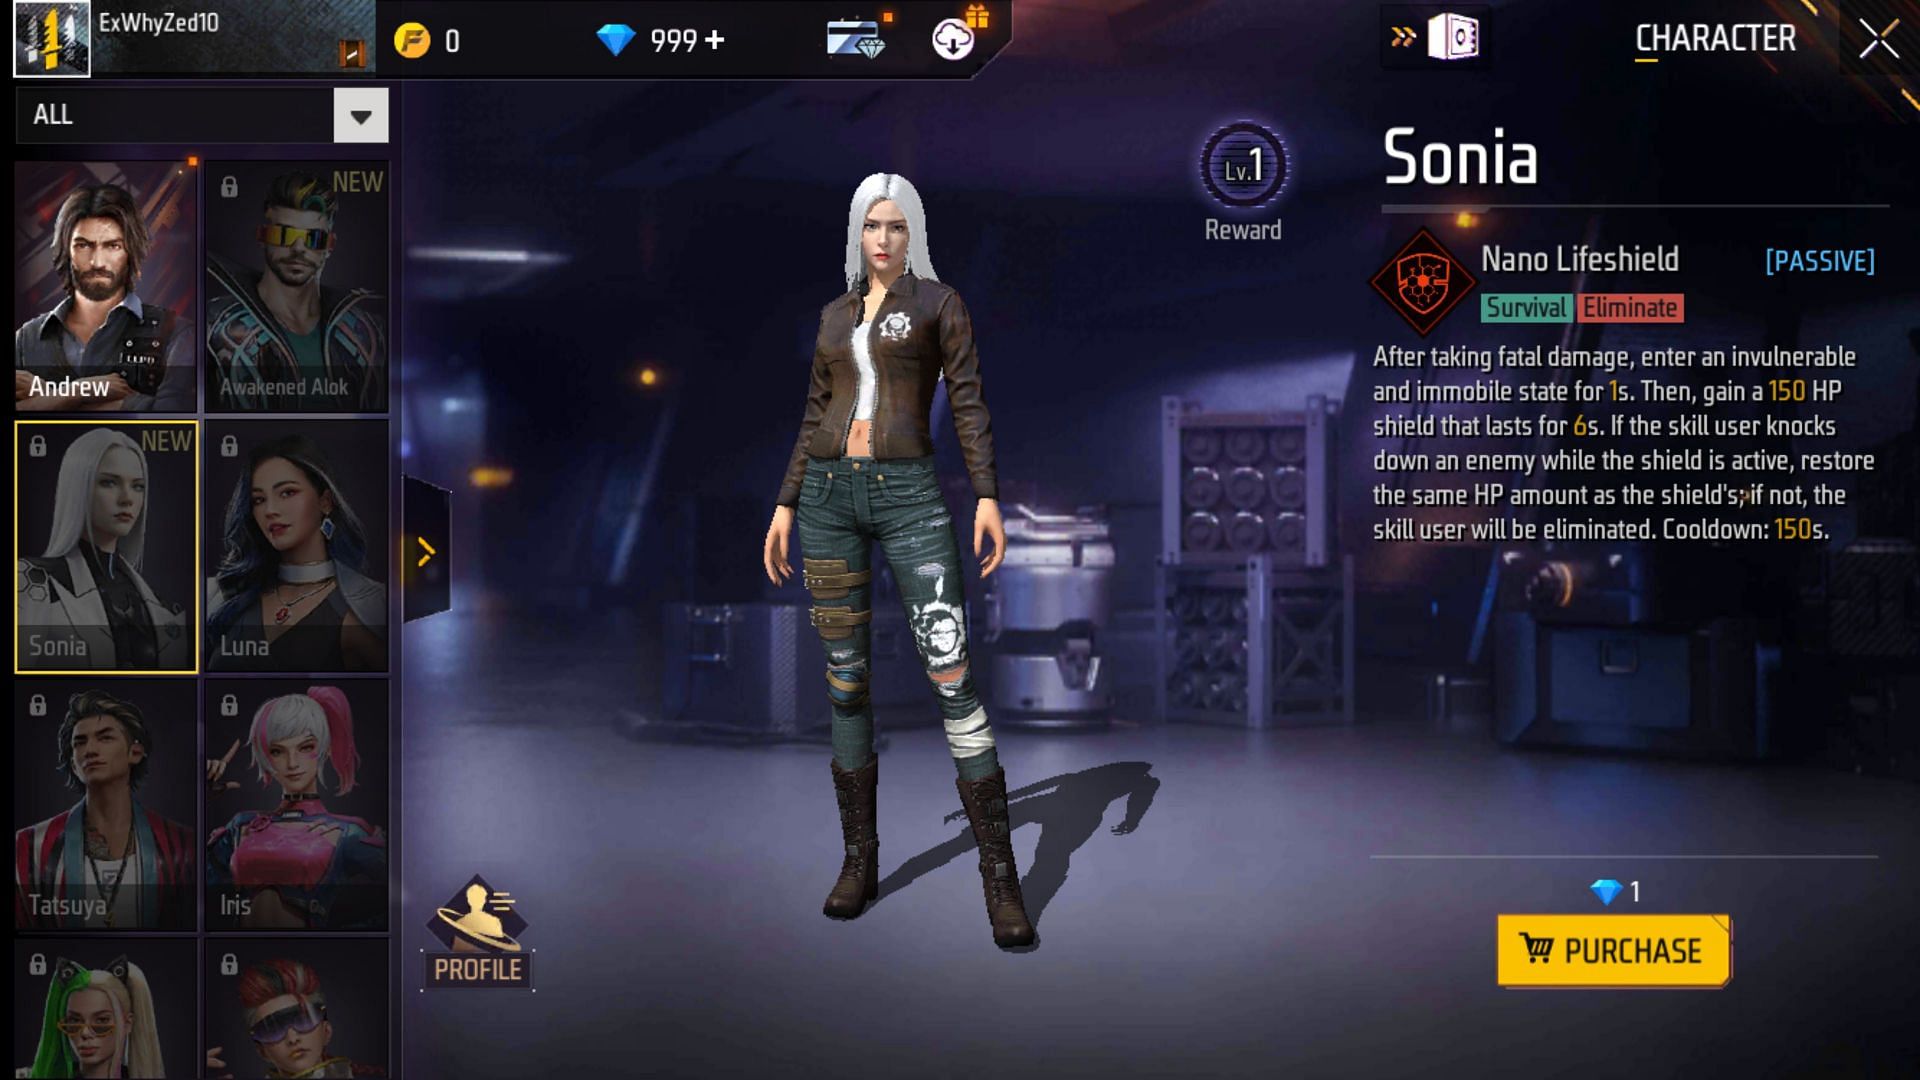 Details of the Sonia character in the Advance Server (Image via Garena)